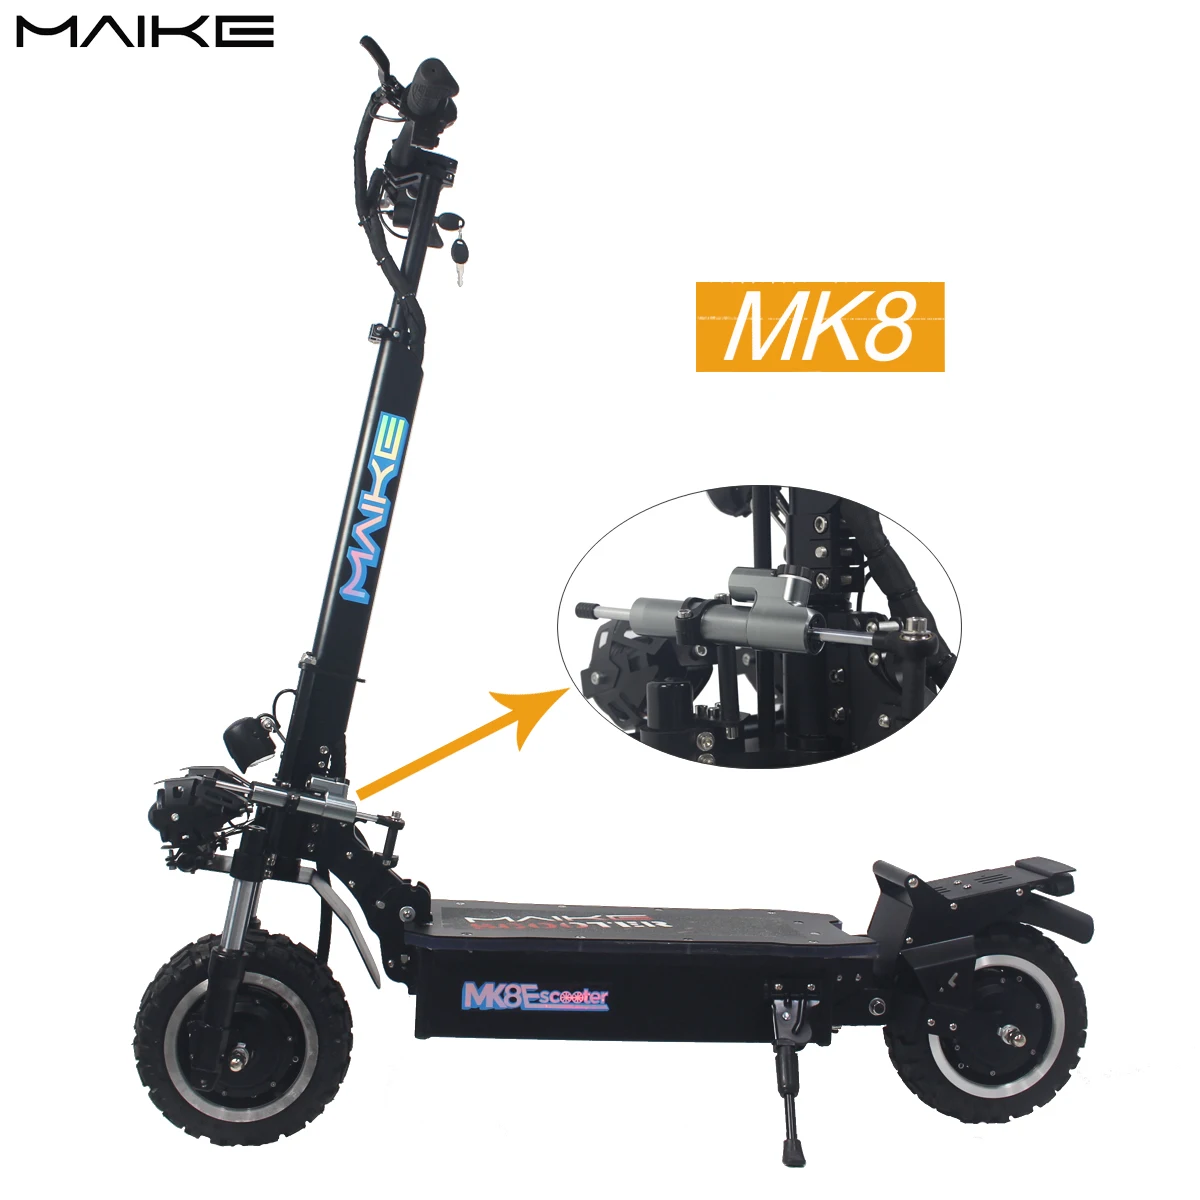 

Maike MK8 11inch 3200w 25Ah Dual Motor Battery E Scooter Off Road China Scooter electric Scooter, Black